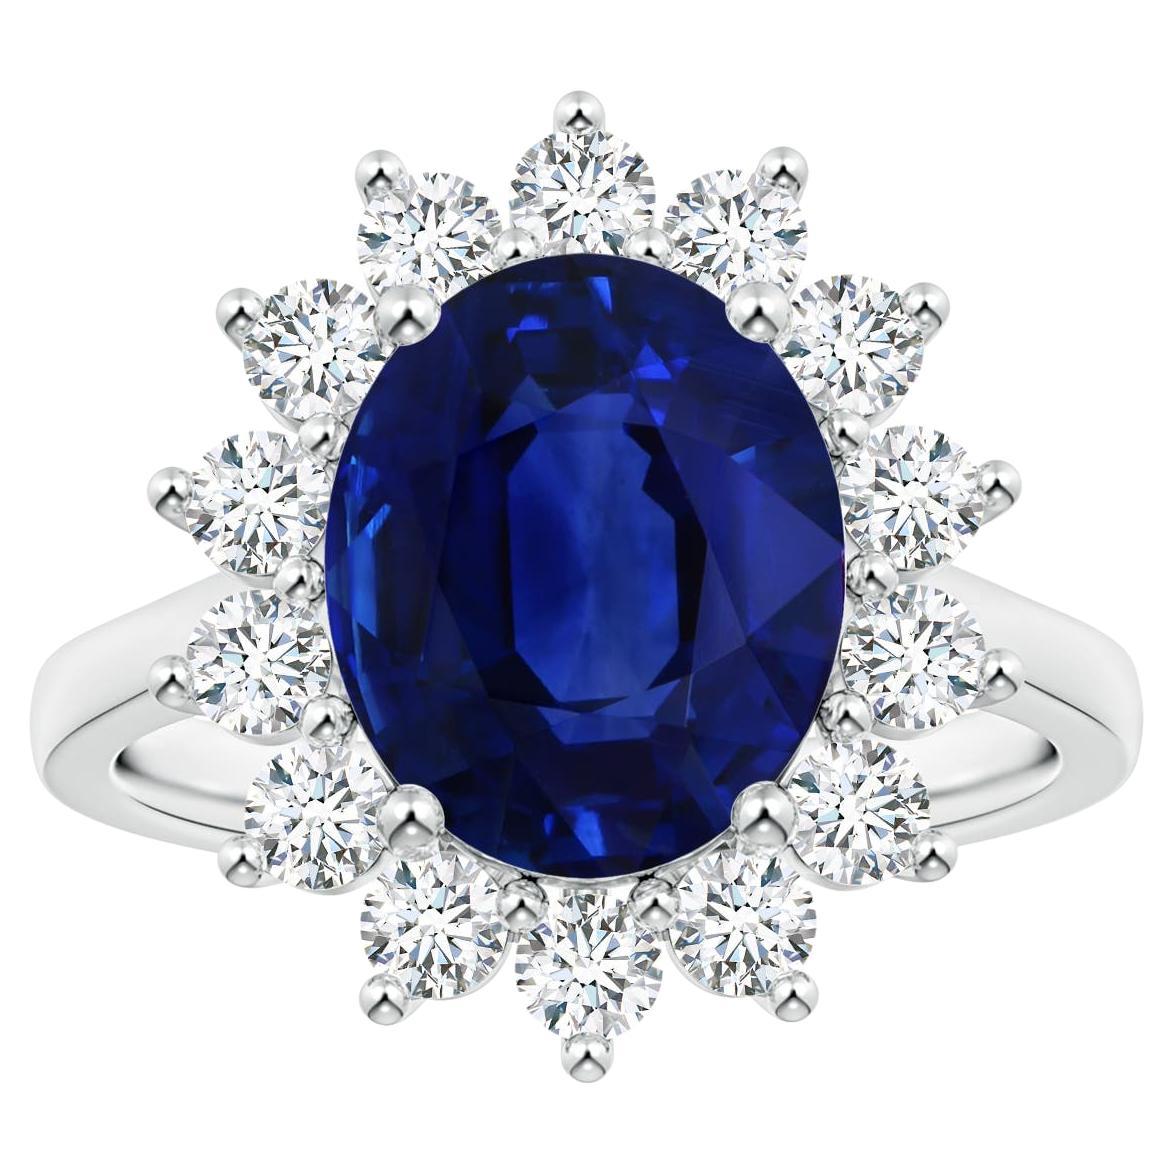 ANGARA Princess Diana Inspired GIA Certified Sapphire Halo Ring in White Gold